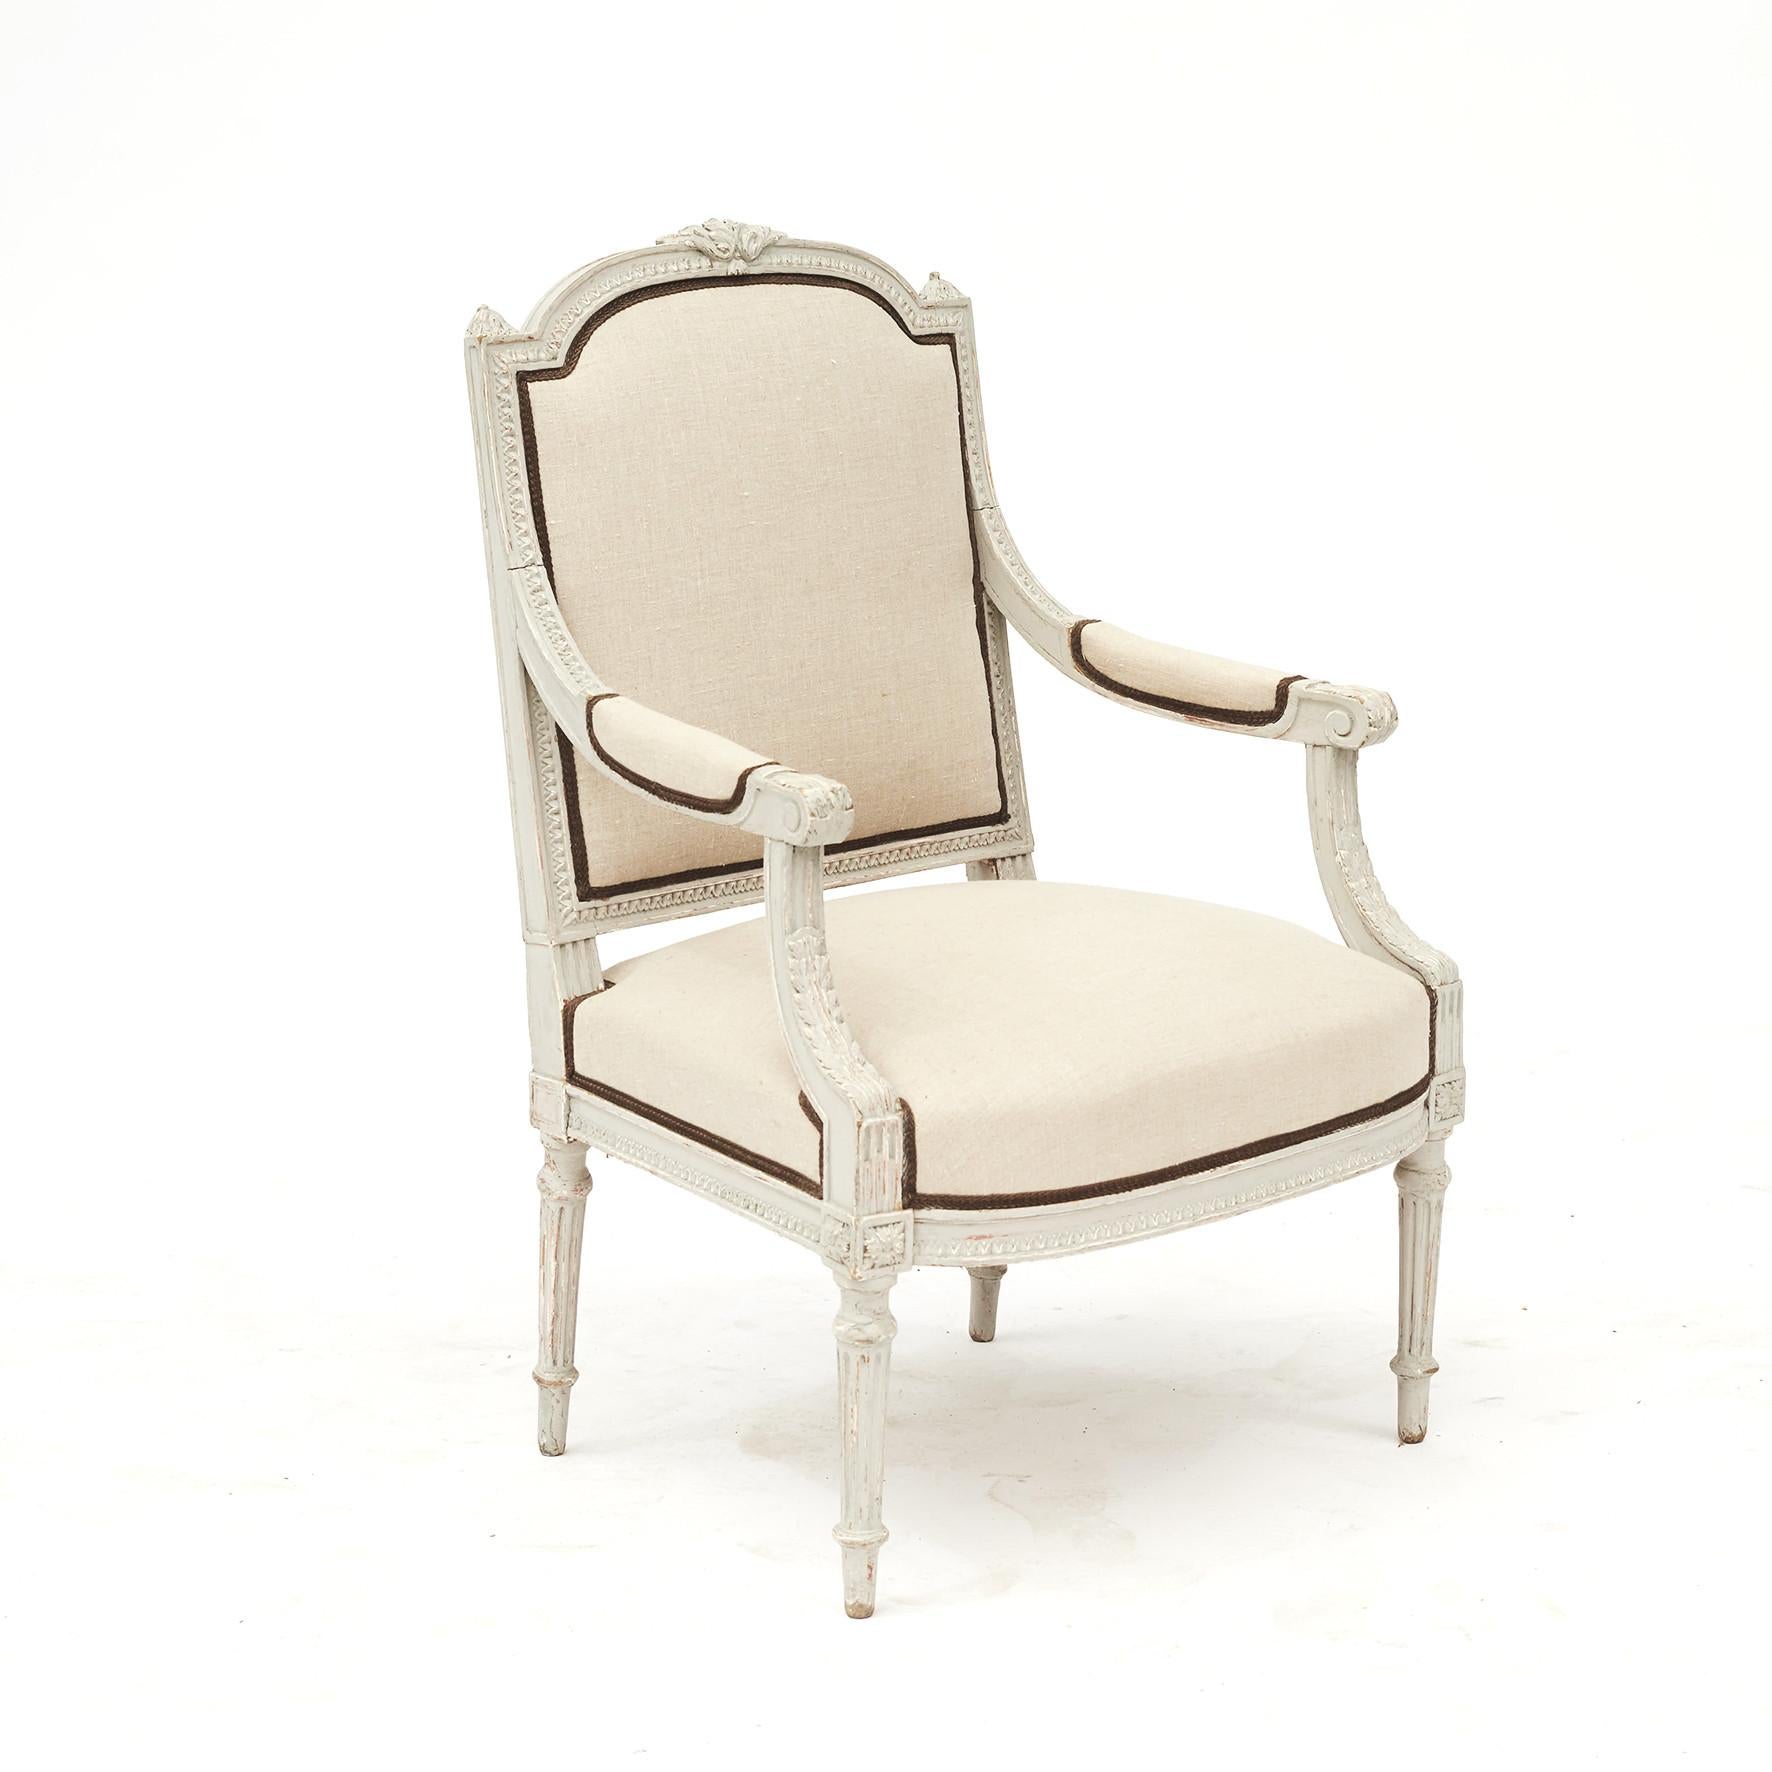 Pair of French armchairs in the style of Louis XVI, 1860-1870.
Carved detailing all along the light grey framework, on fluted and tapered legs.
Upholstered in light canvas fabric with brown trimming.
Sold as a pair.